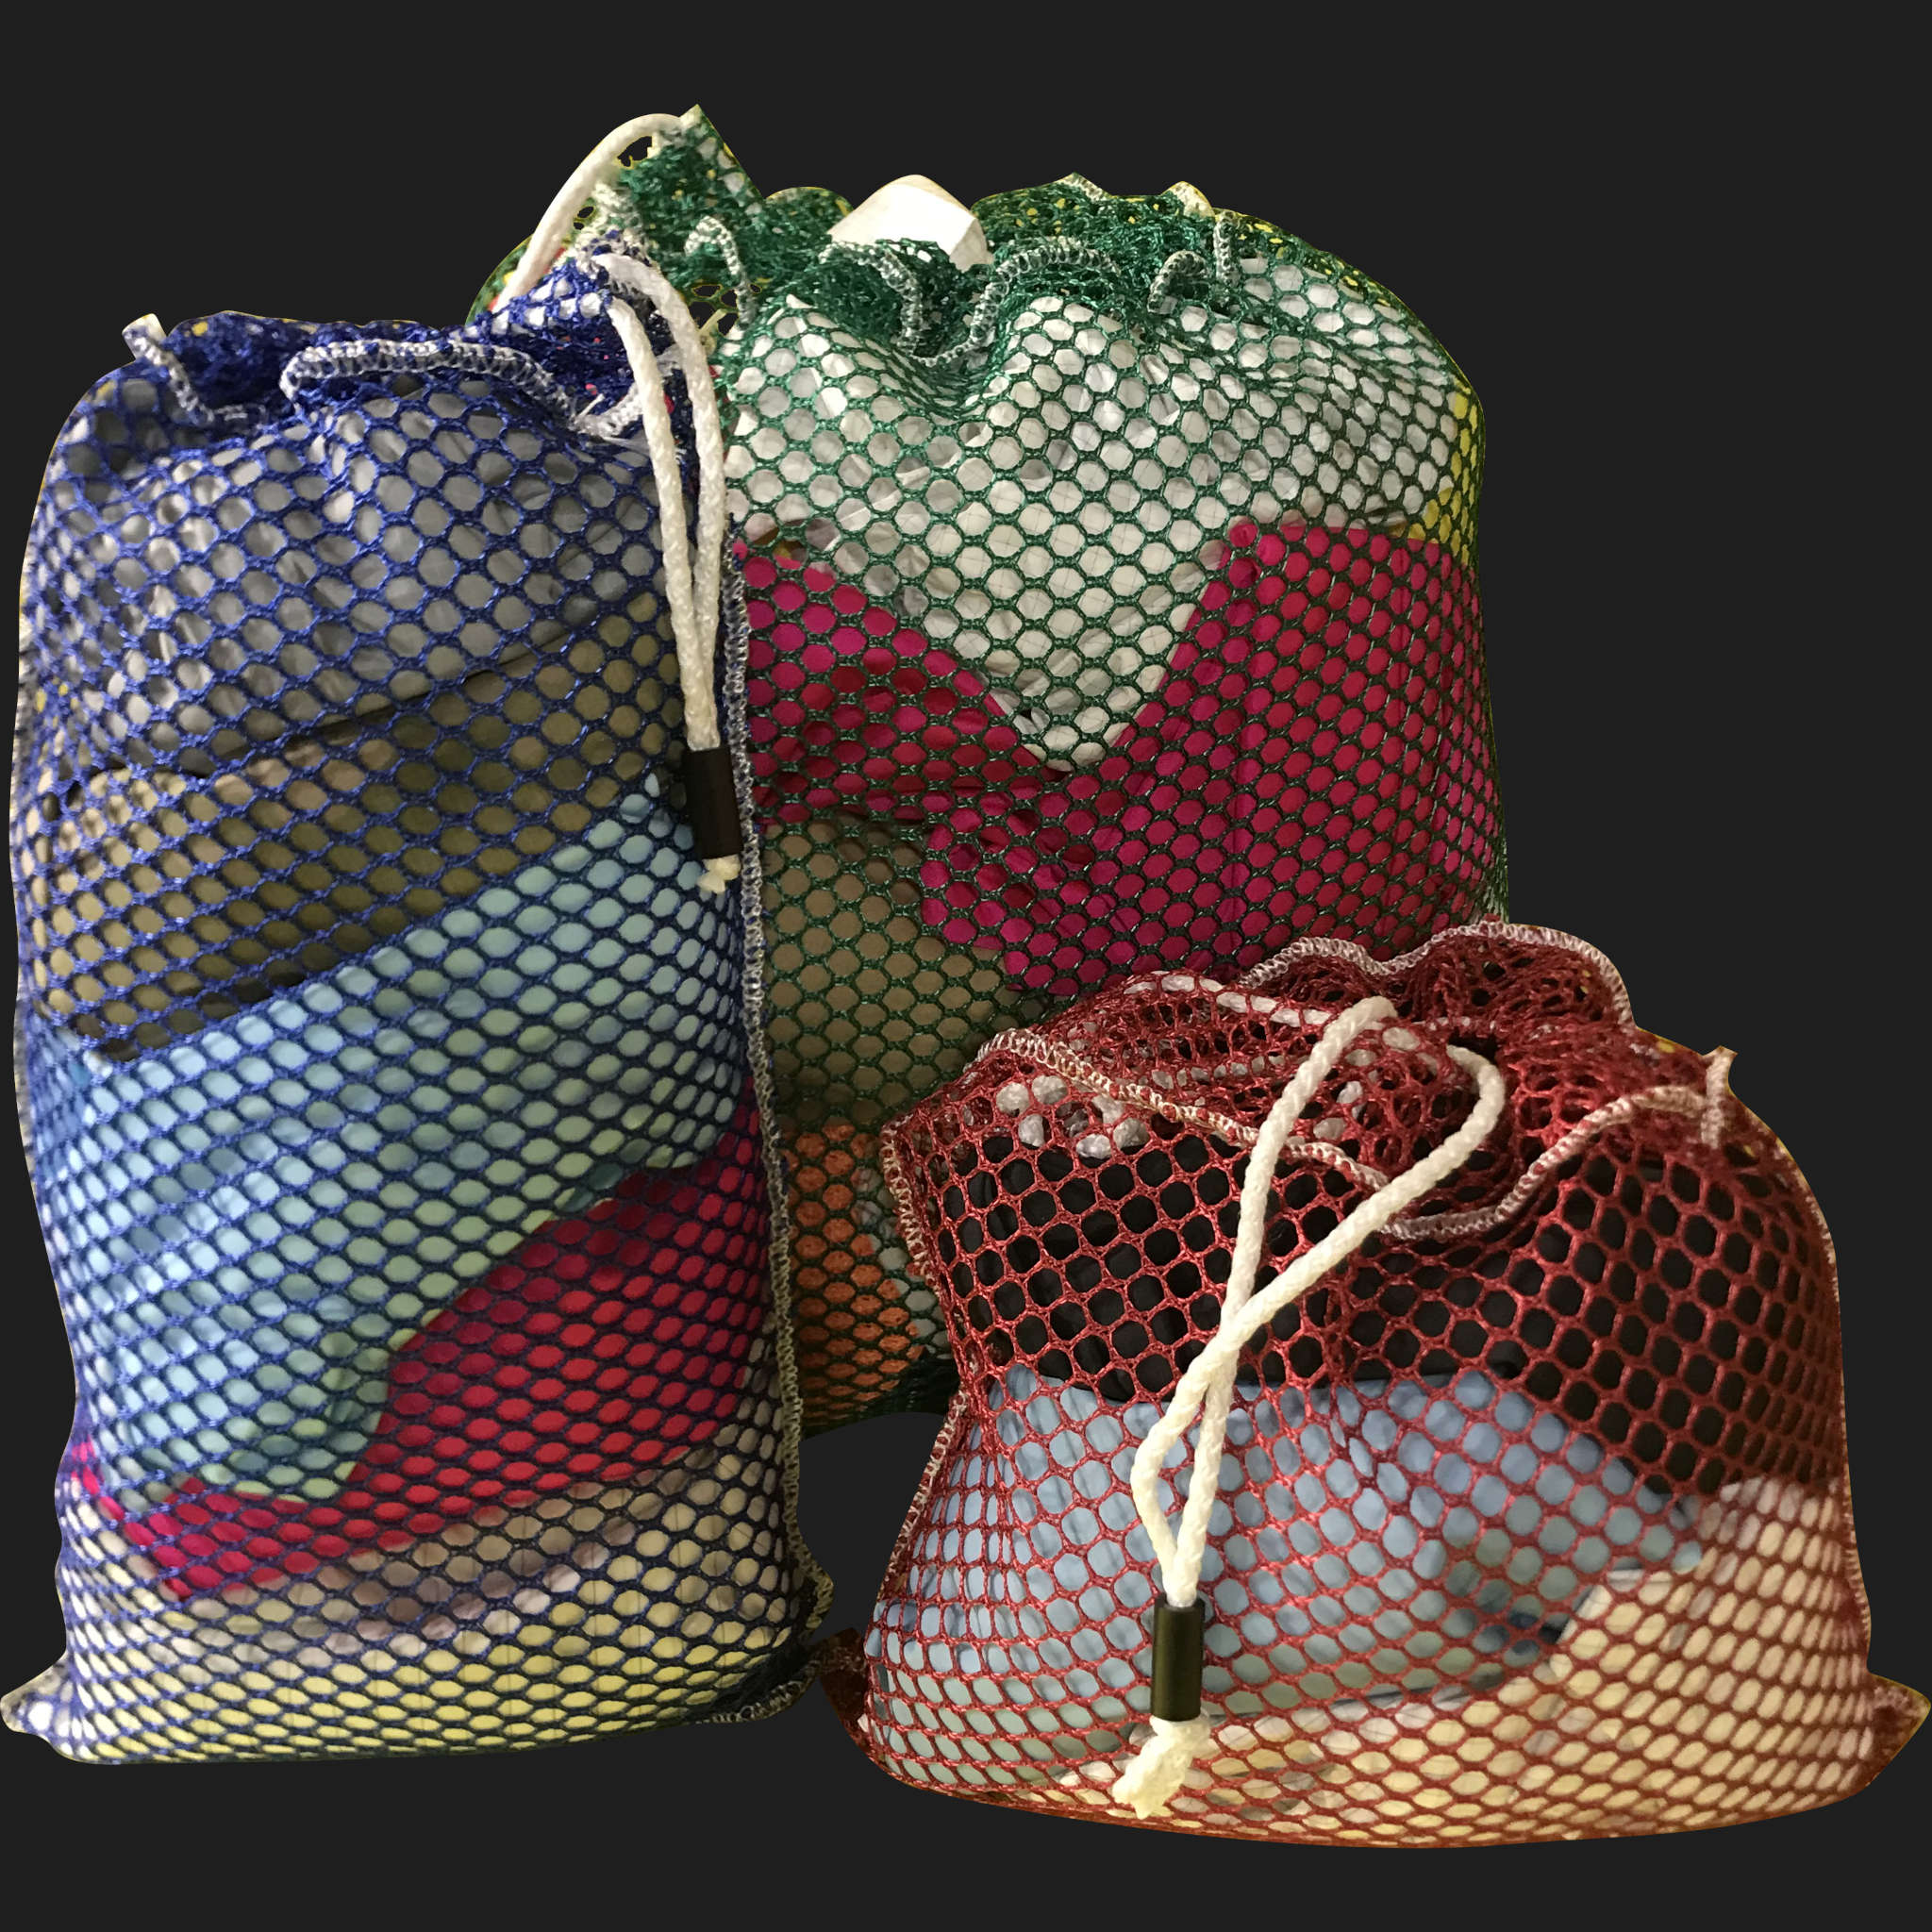 56" x 66" Customized Mesh-Net-Laundry Bags Heavy Duty with Cord and barrellock closure